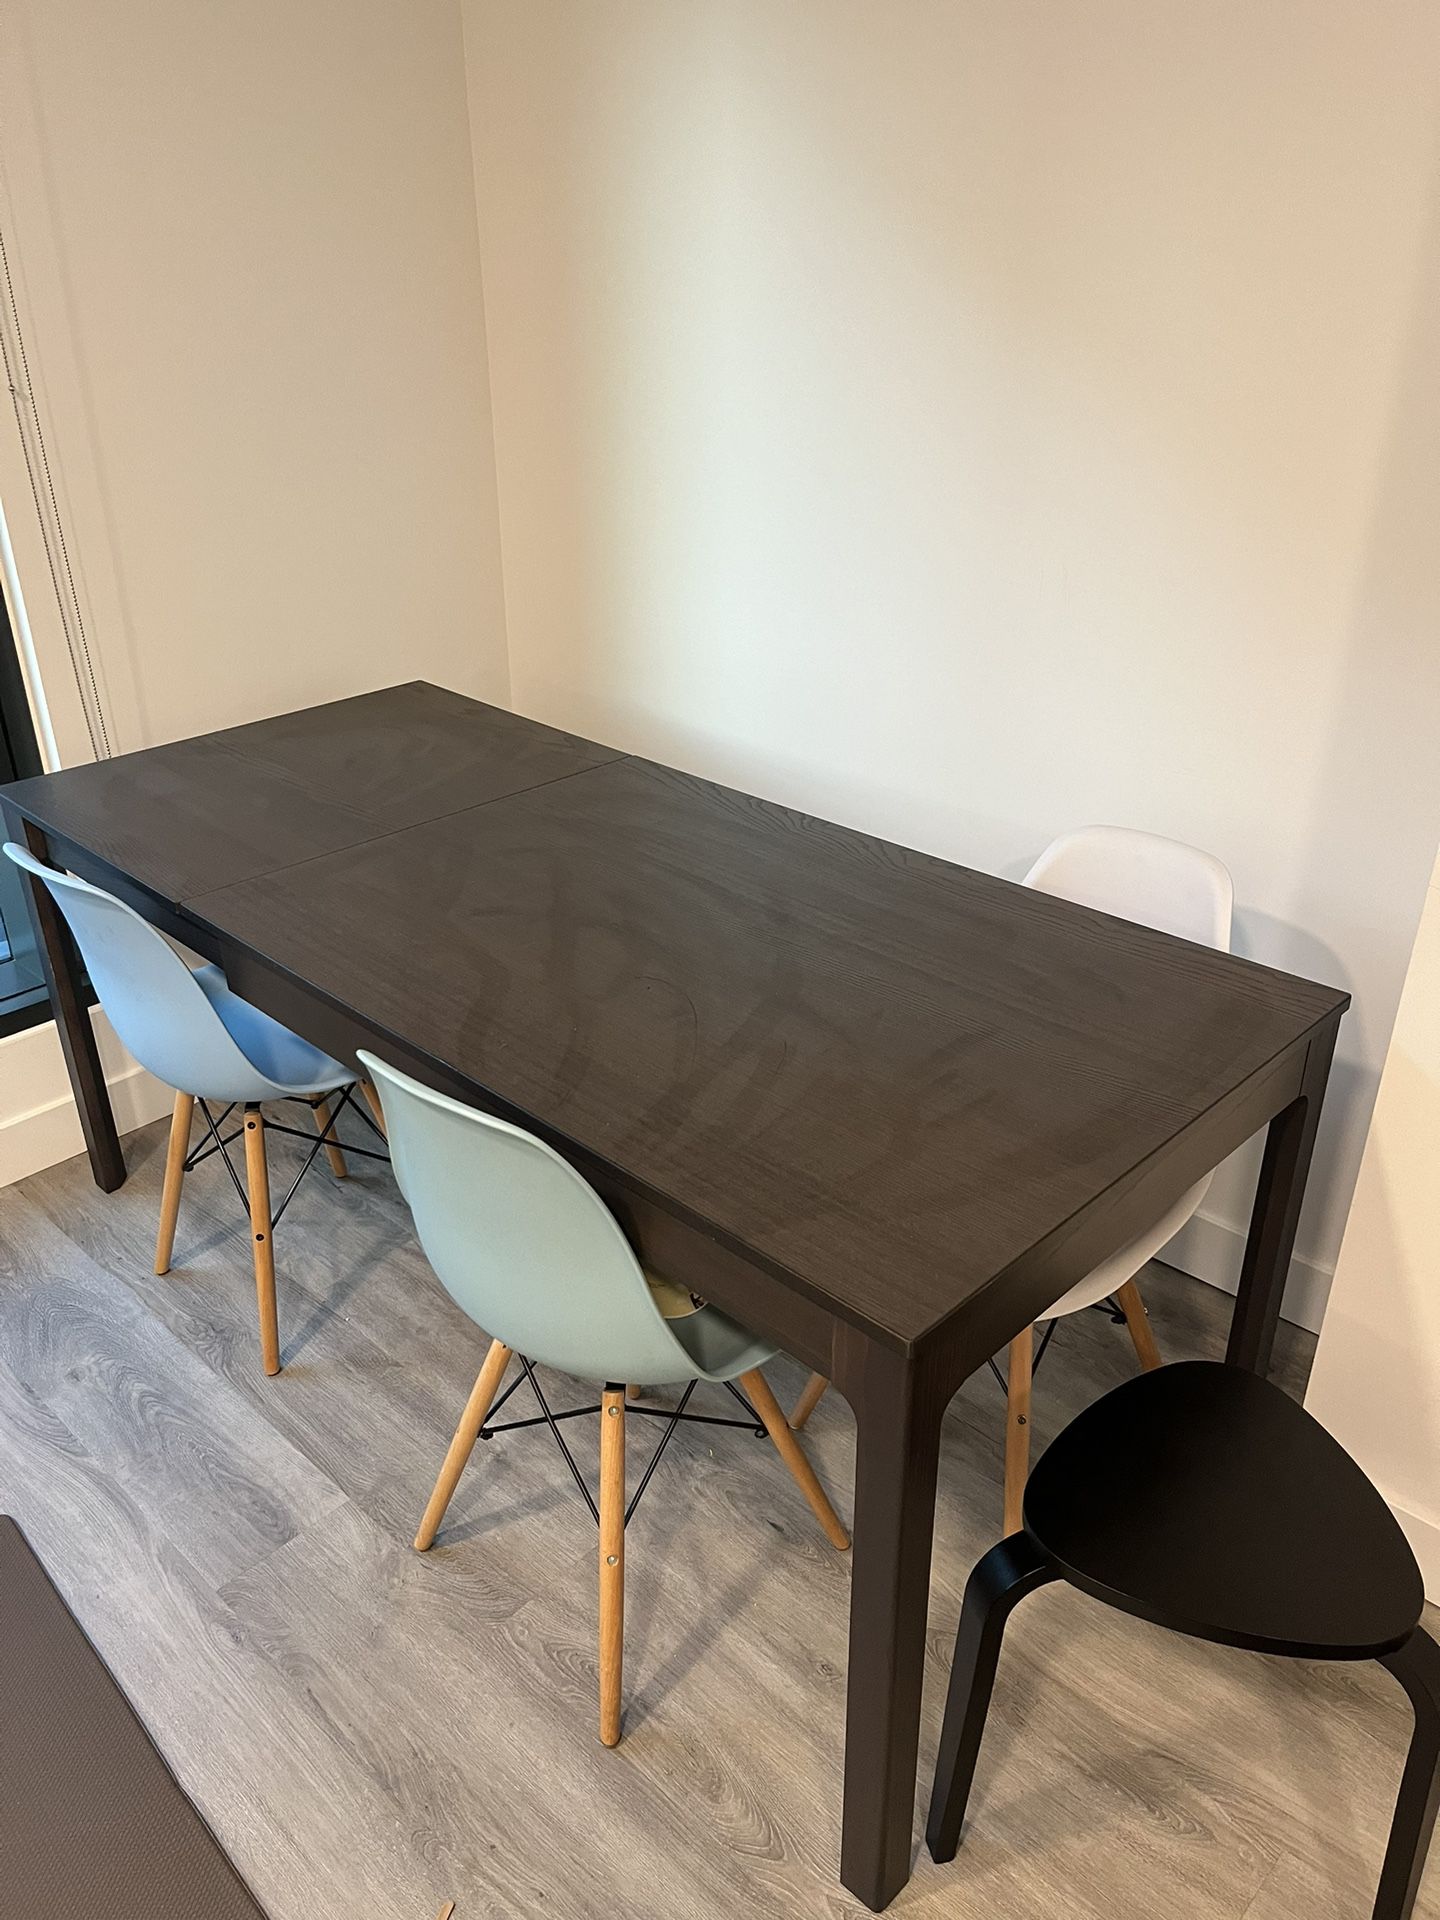 IKEA Dining Table